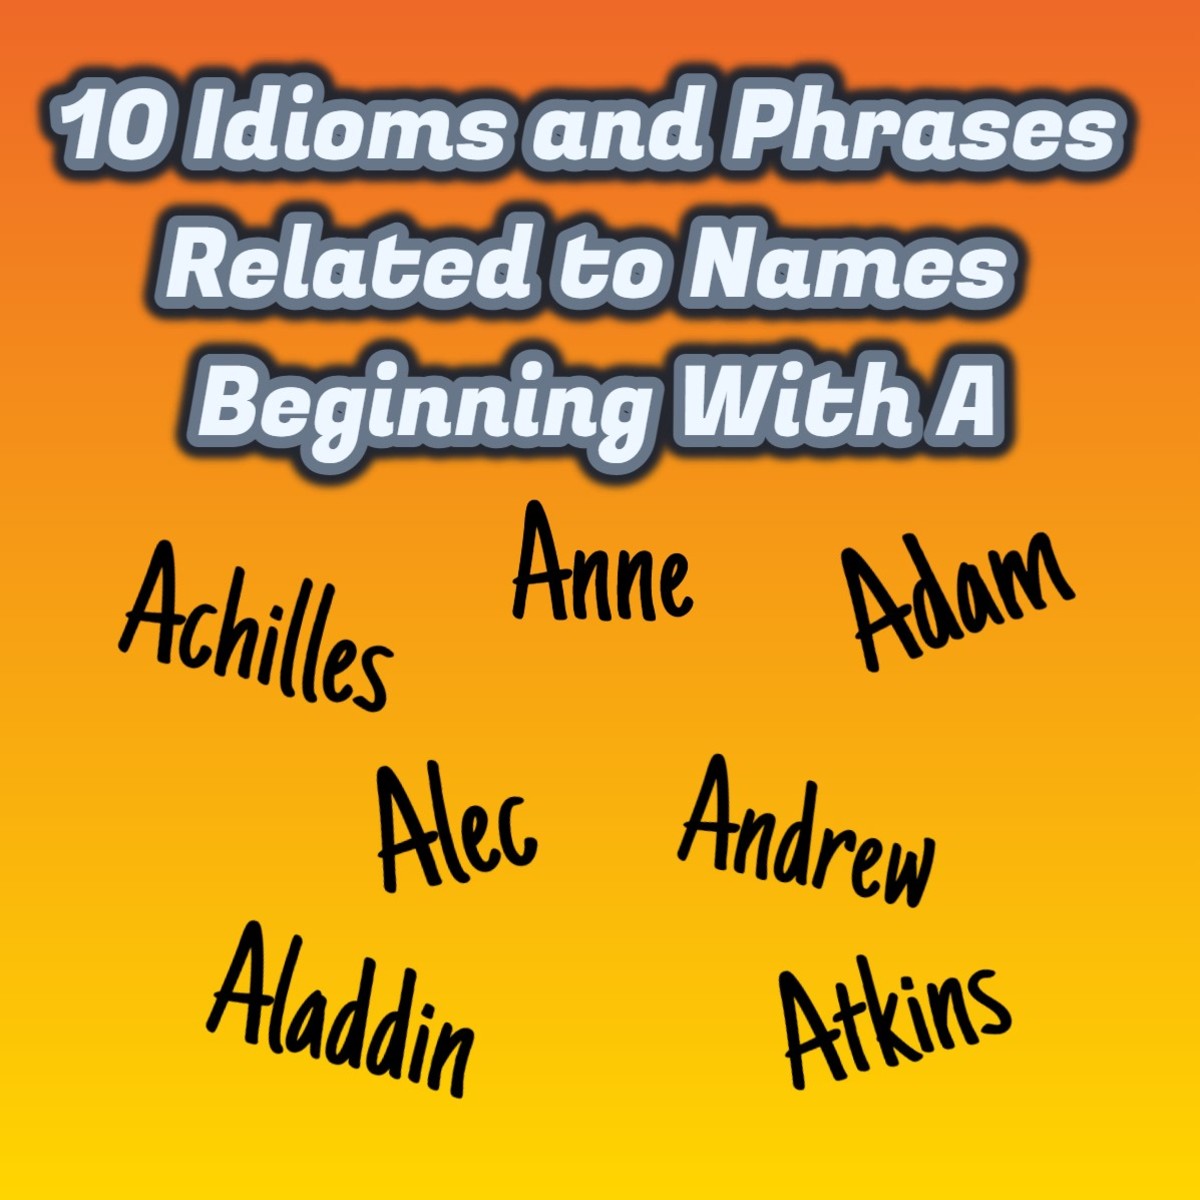 10 Name Related Idioms and Phrases Beginning With A